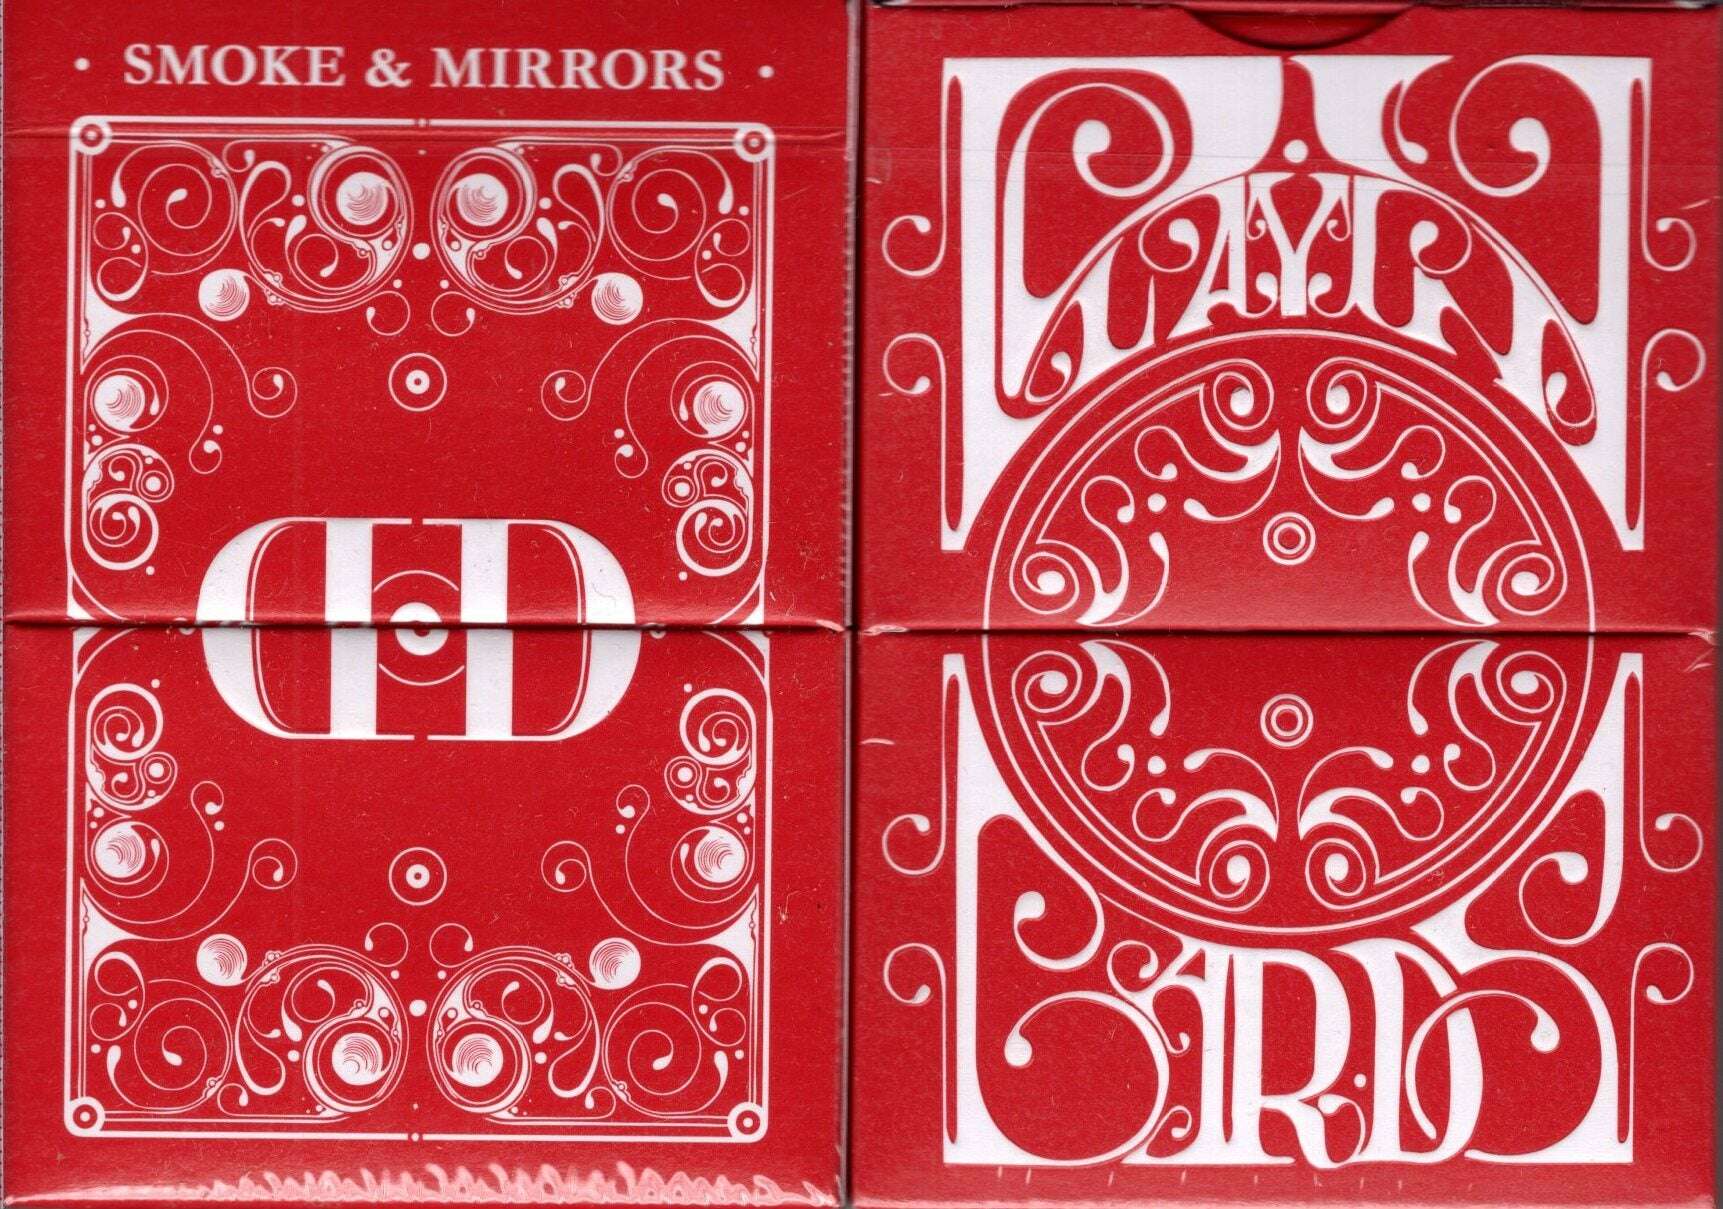 PlayingCardDecks.com-Smoke & Mirrors v8 Red Deluxe Playing Cards USPCC